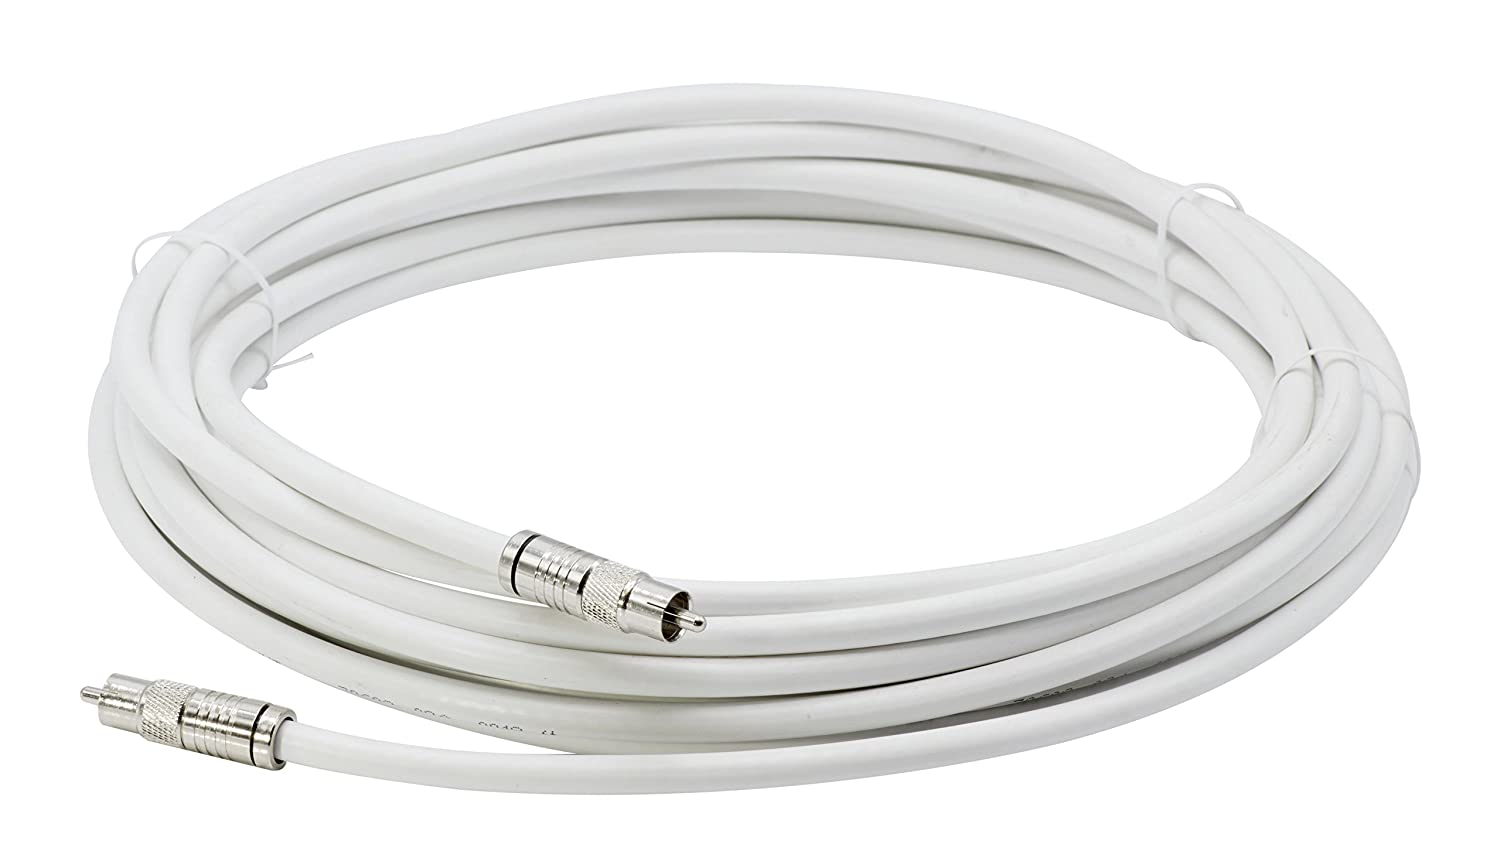 THE CIMPLE CO - White Digital Audio Coaxial Cable Subwoofer Cable - (S/PDIF) RCA Cable, 150 Feet - image 1 of 6